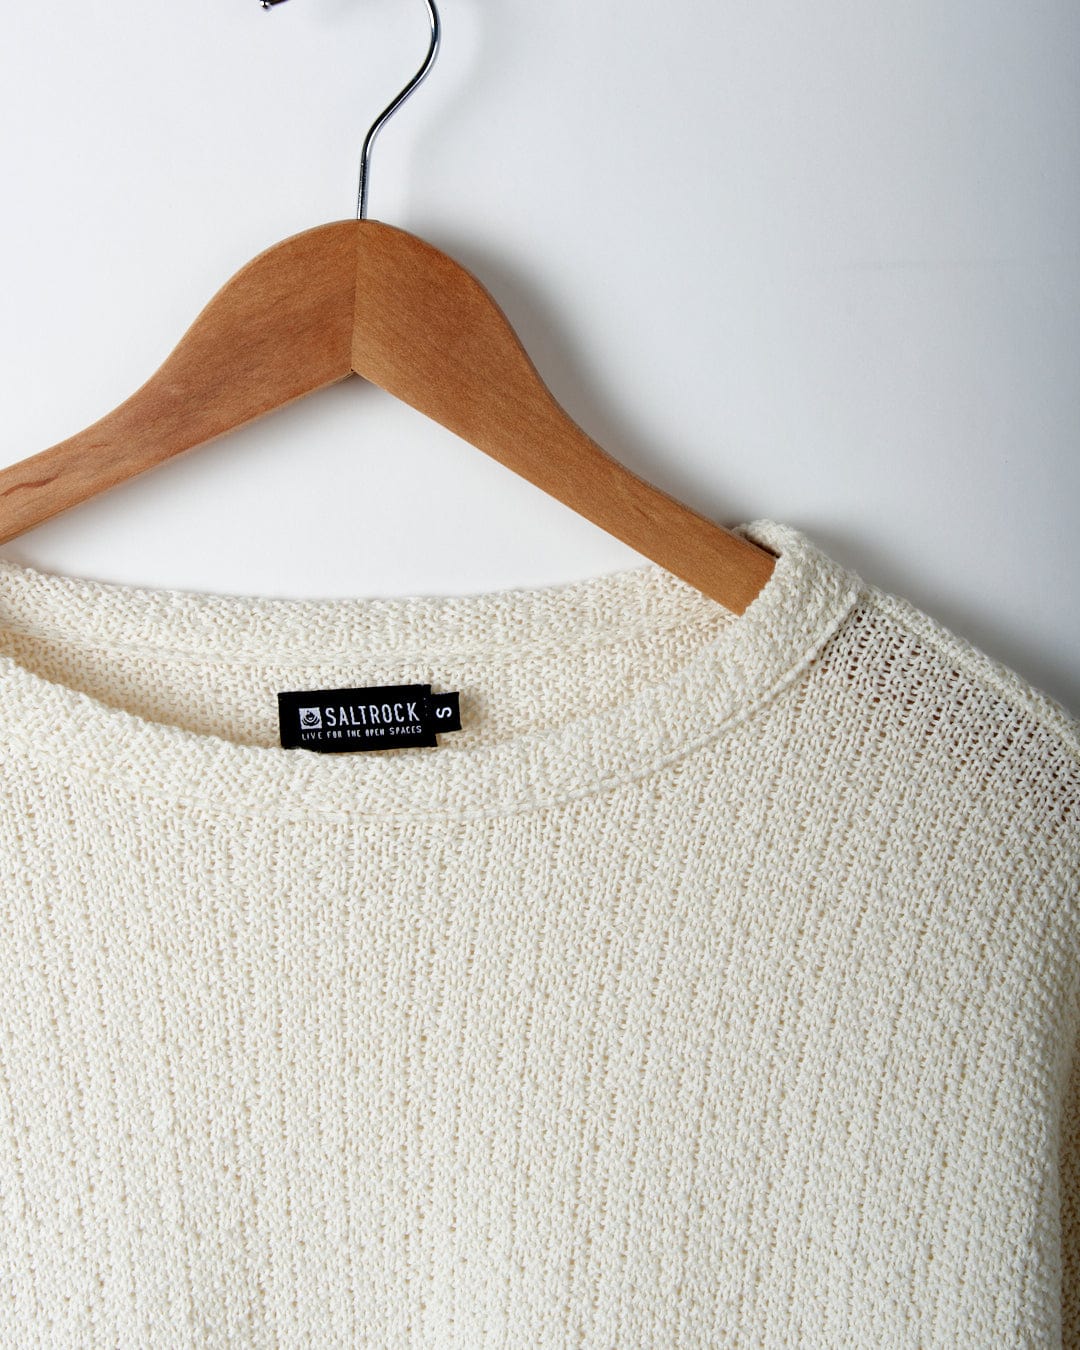 Beige textured knit sweater on a wooden hanger against a white background, with a visible brand label that reads 